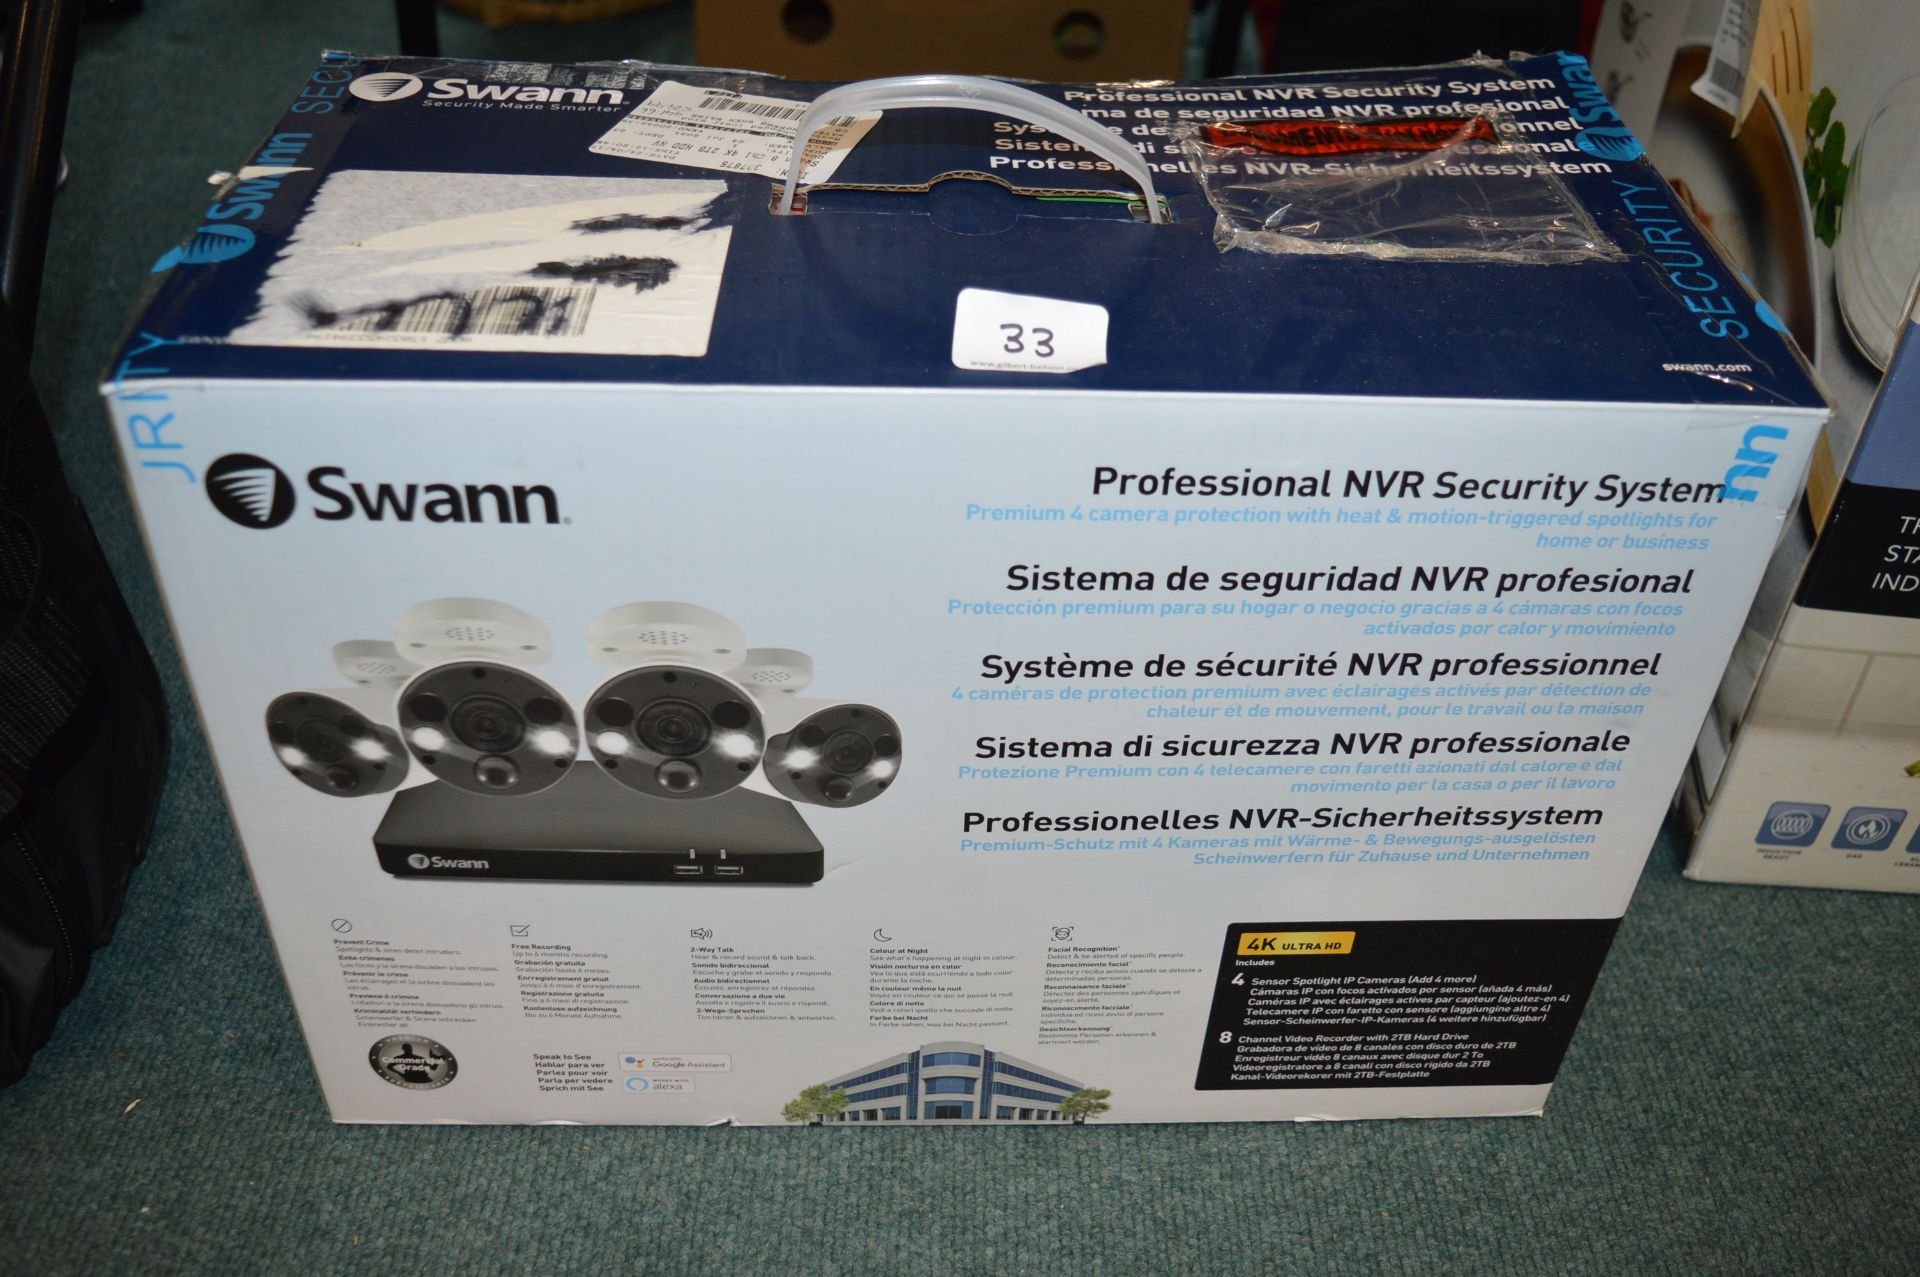 *Swan NVR Security System